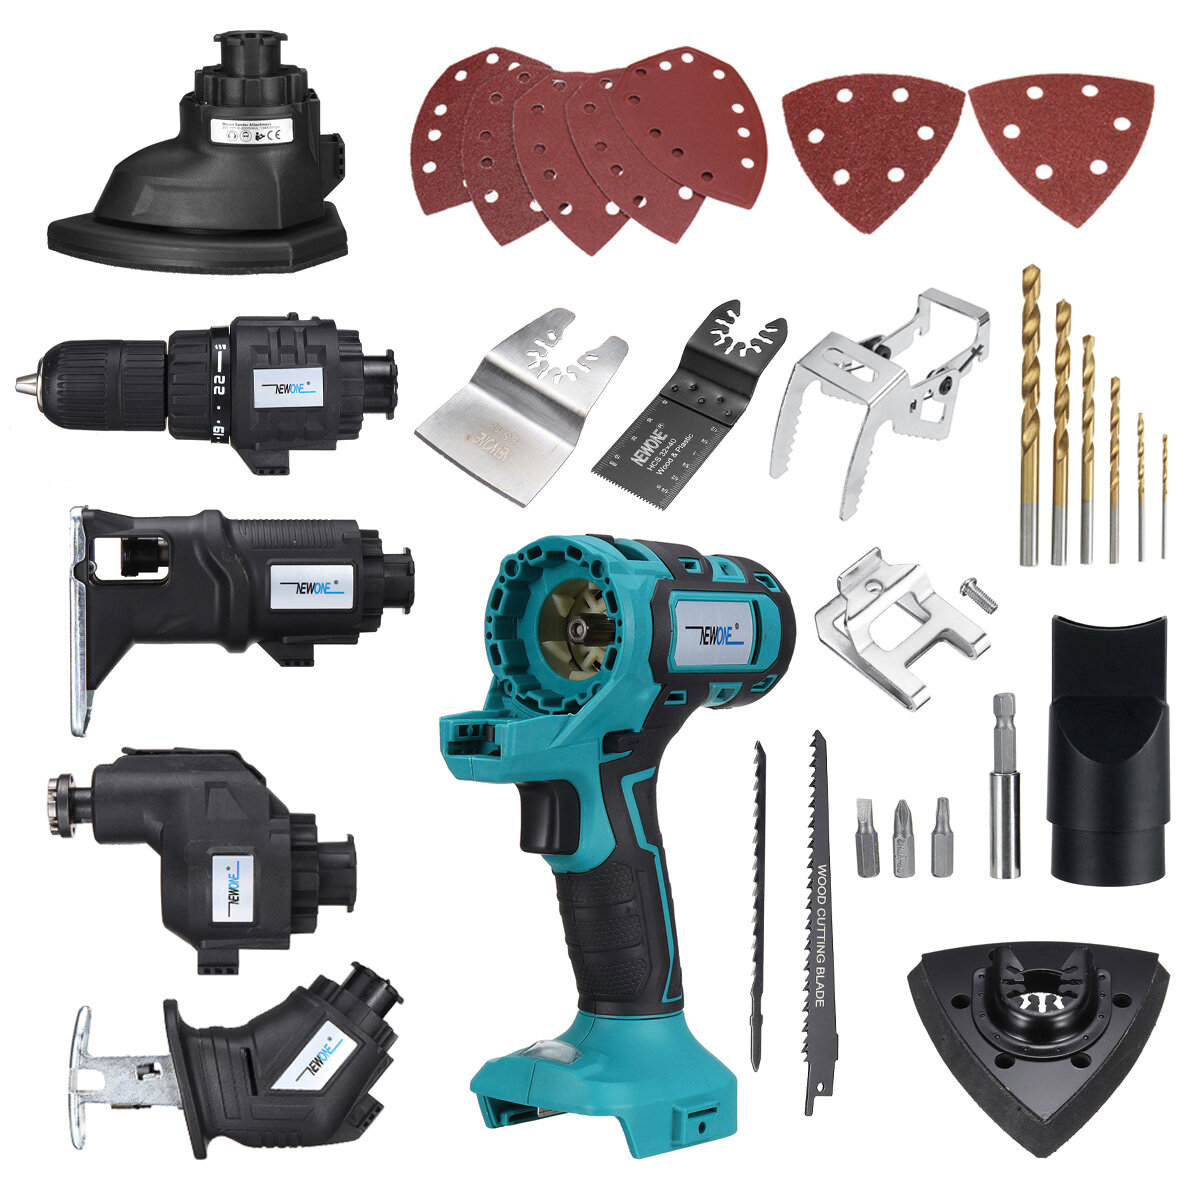 Woodworking Hardware Electric Tools Set Electric Drill/Jig Saw/Reciprocating Saw/Detail Sander/Oscil